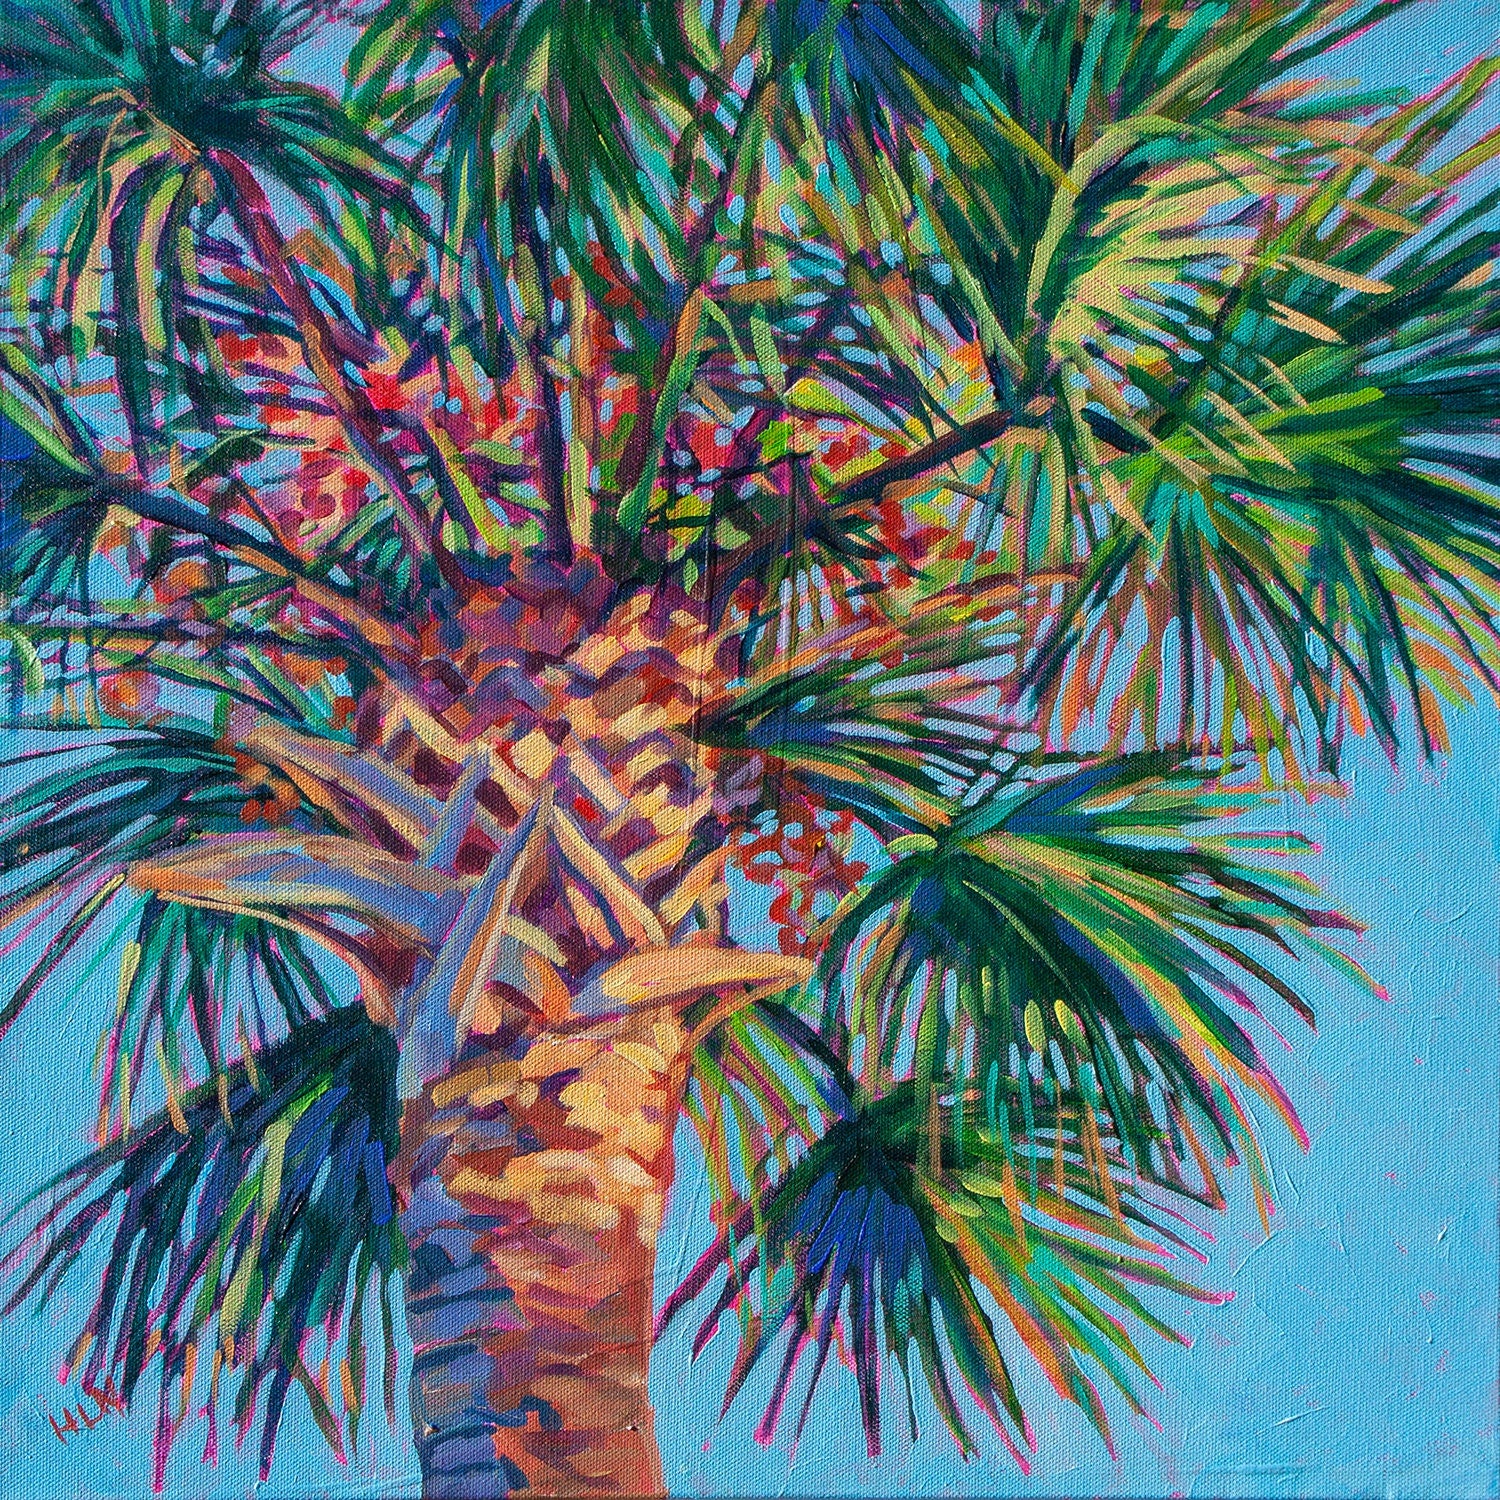 tropical vibrant Painting of Cabbage Palm tree